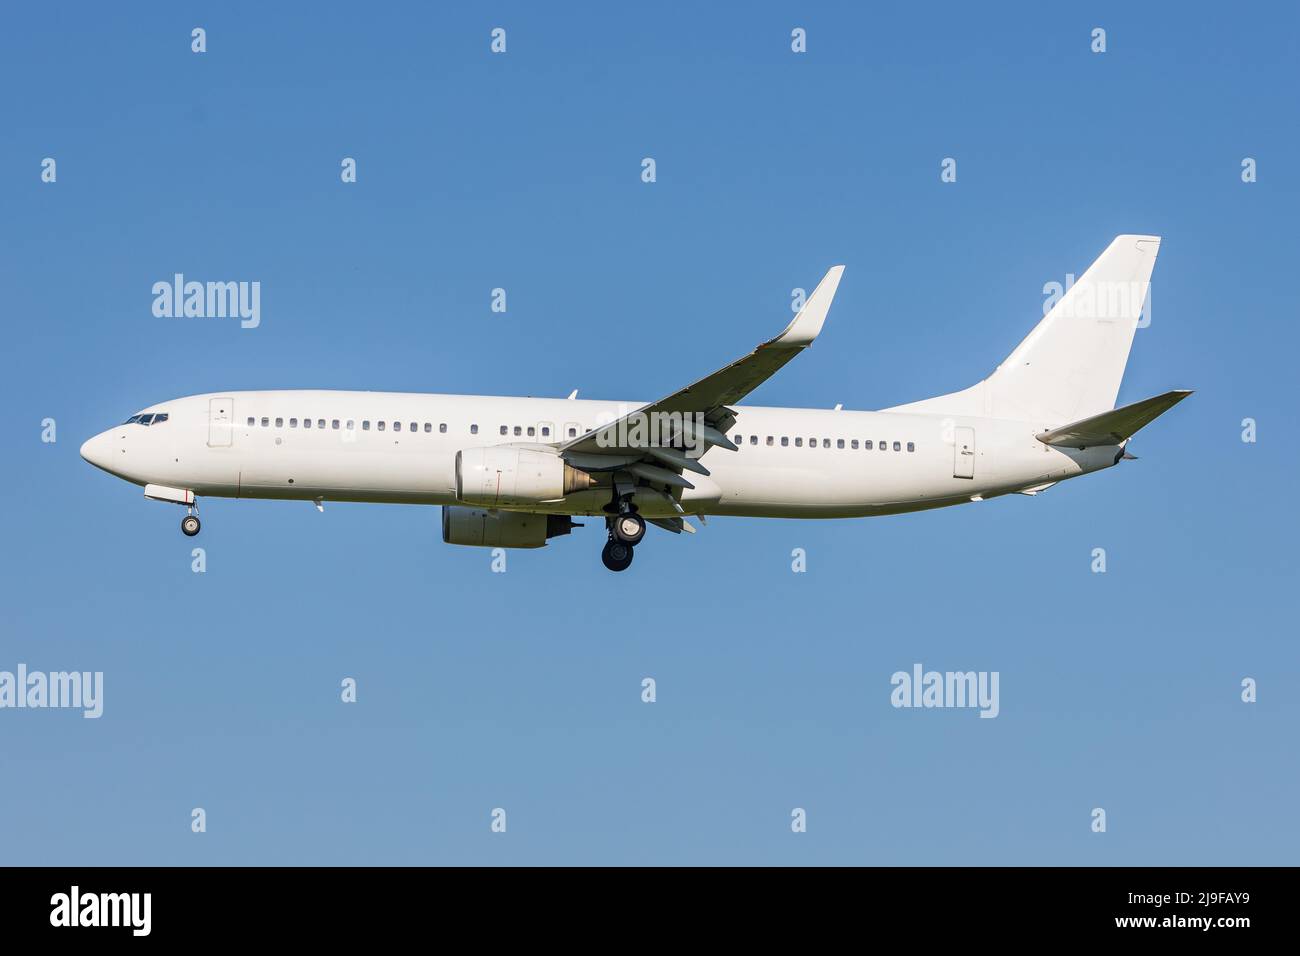 Afull white neutralized Boeing 737 airplane landing with blue skies, usable as a template for liveries. Stock Photo